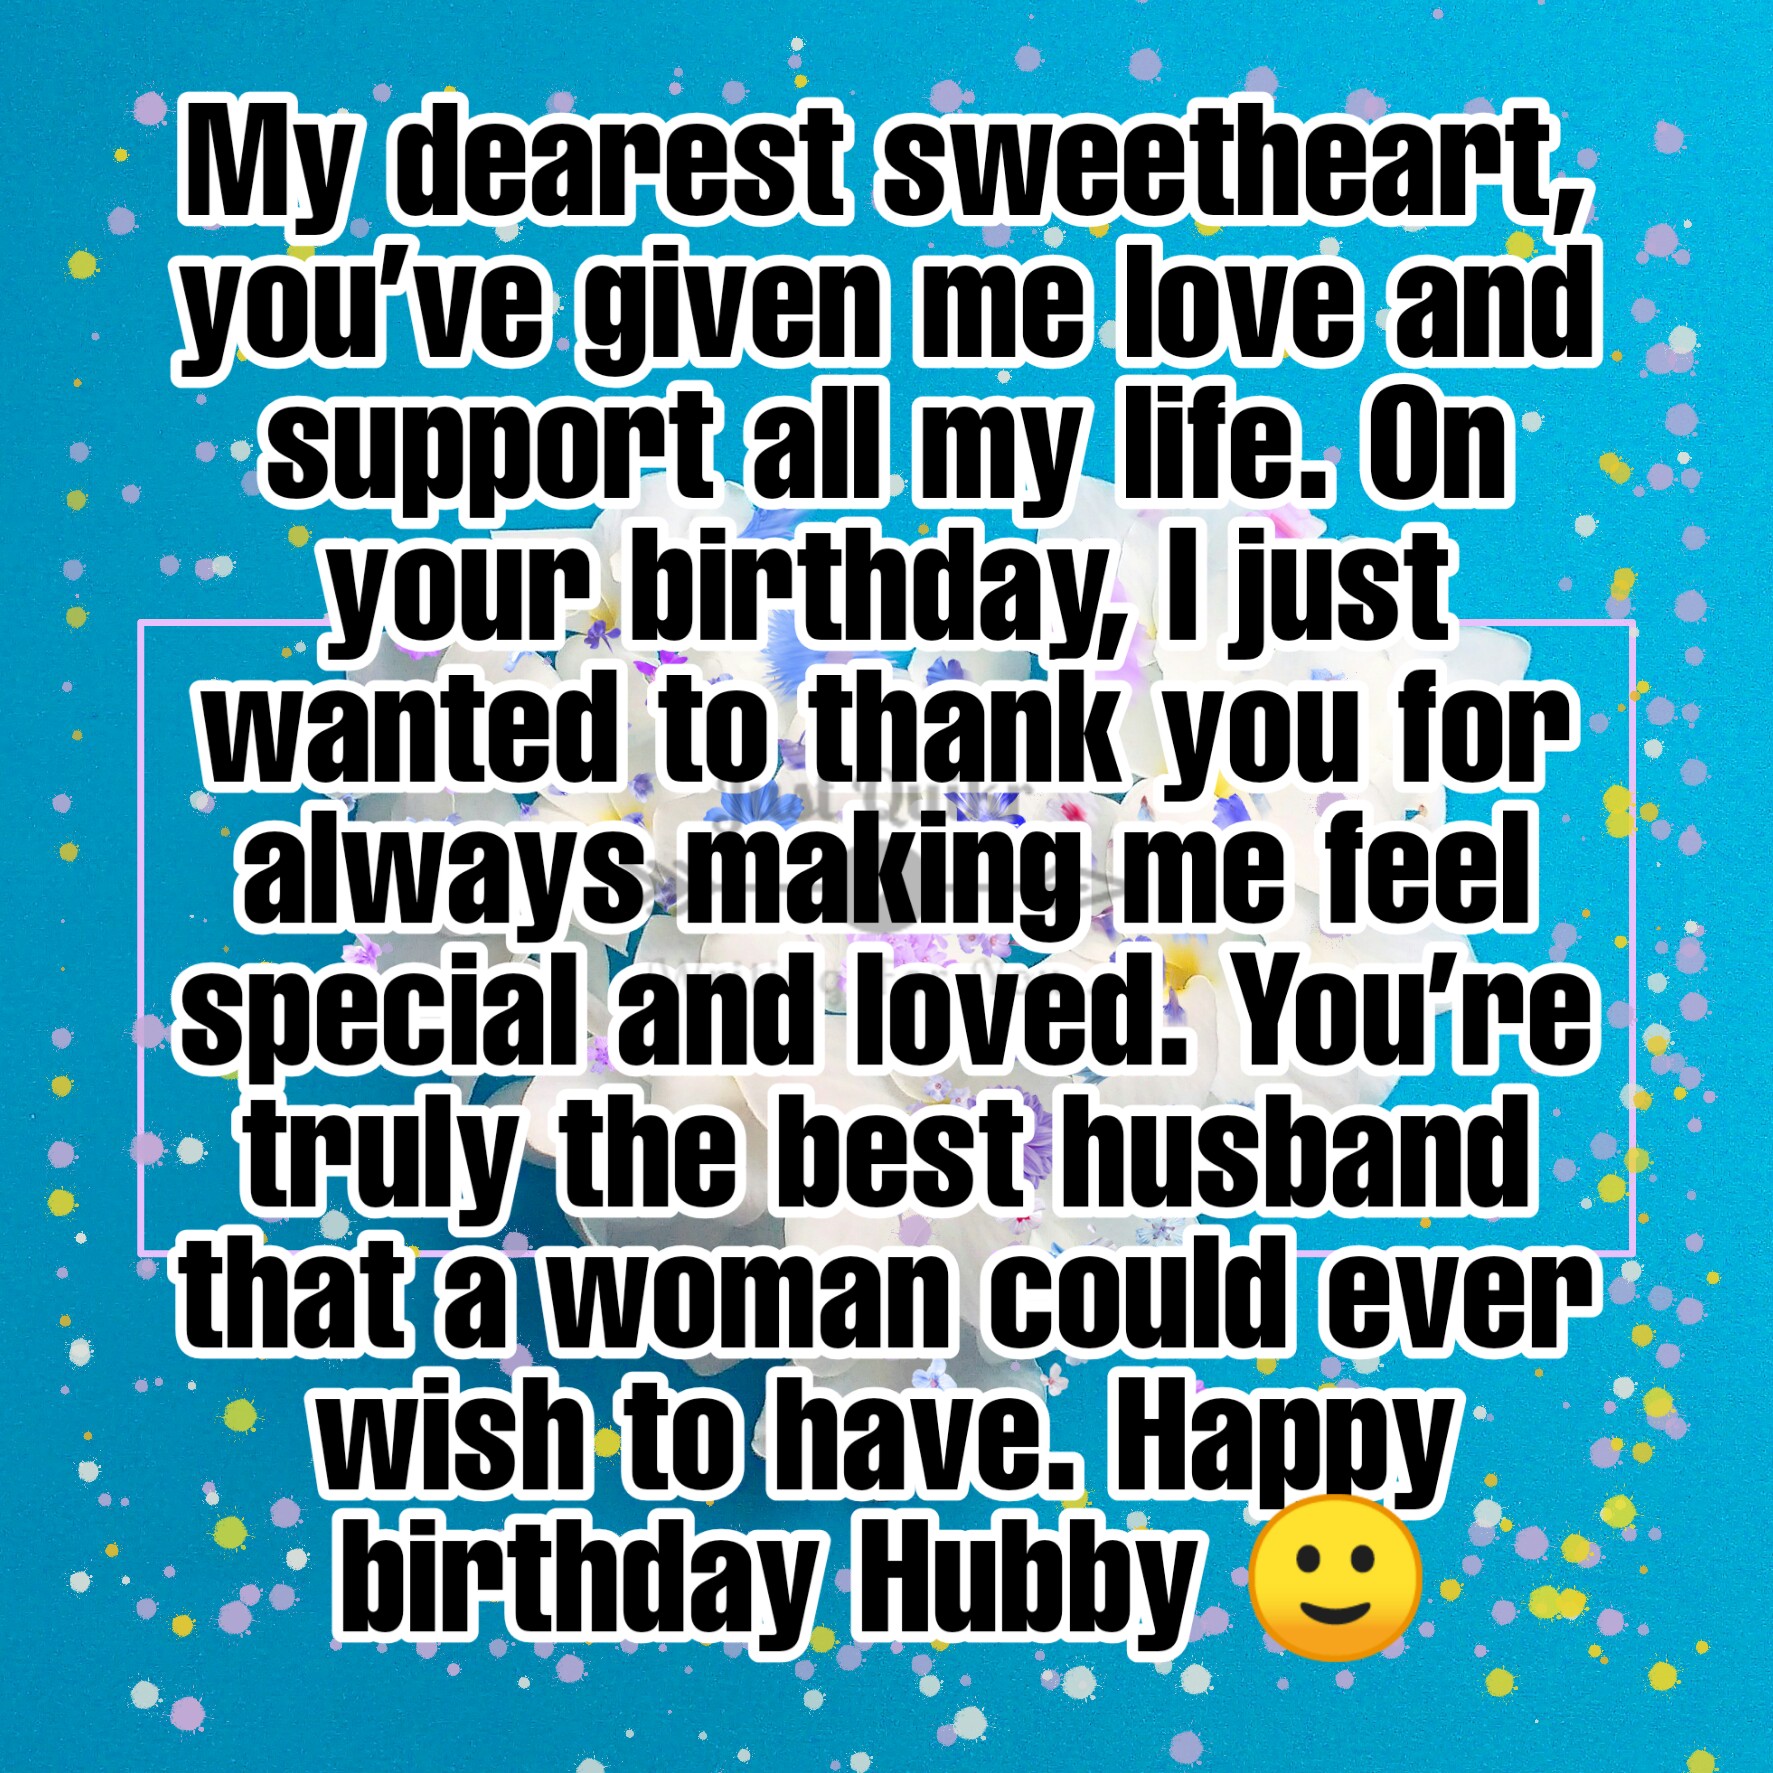 Creative Happy Birthday Wishes Thoughts Quotes Lines Messages in English for Hubby